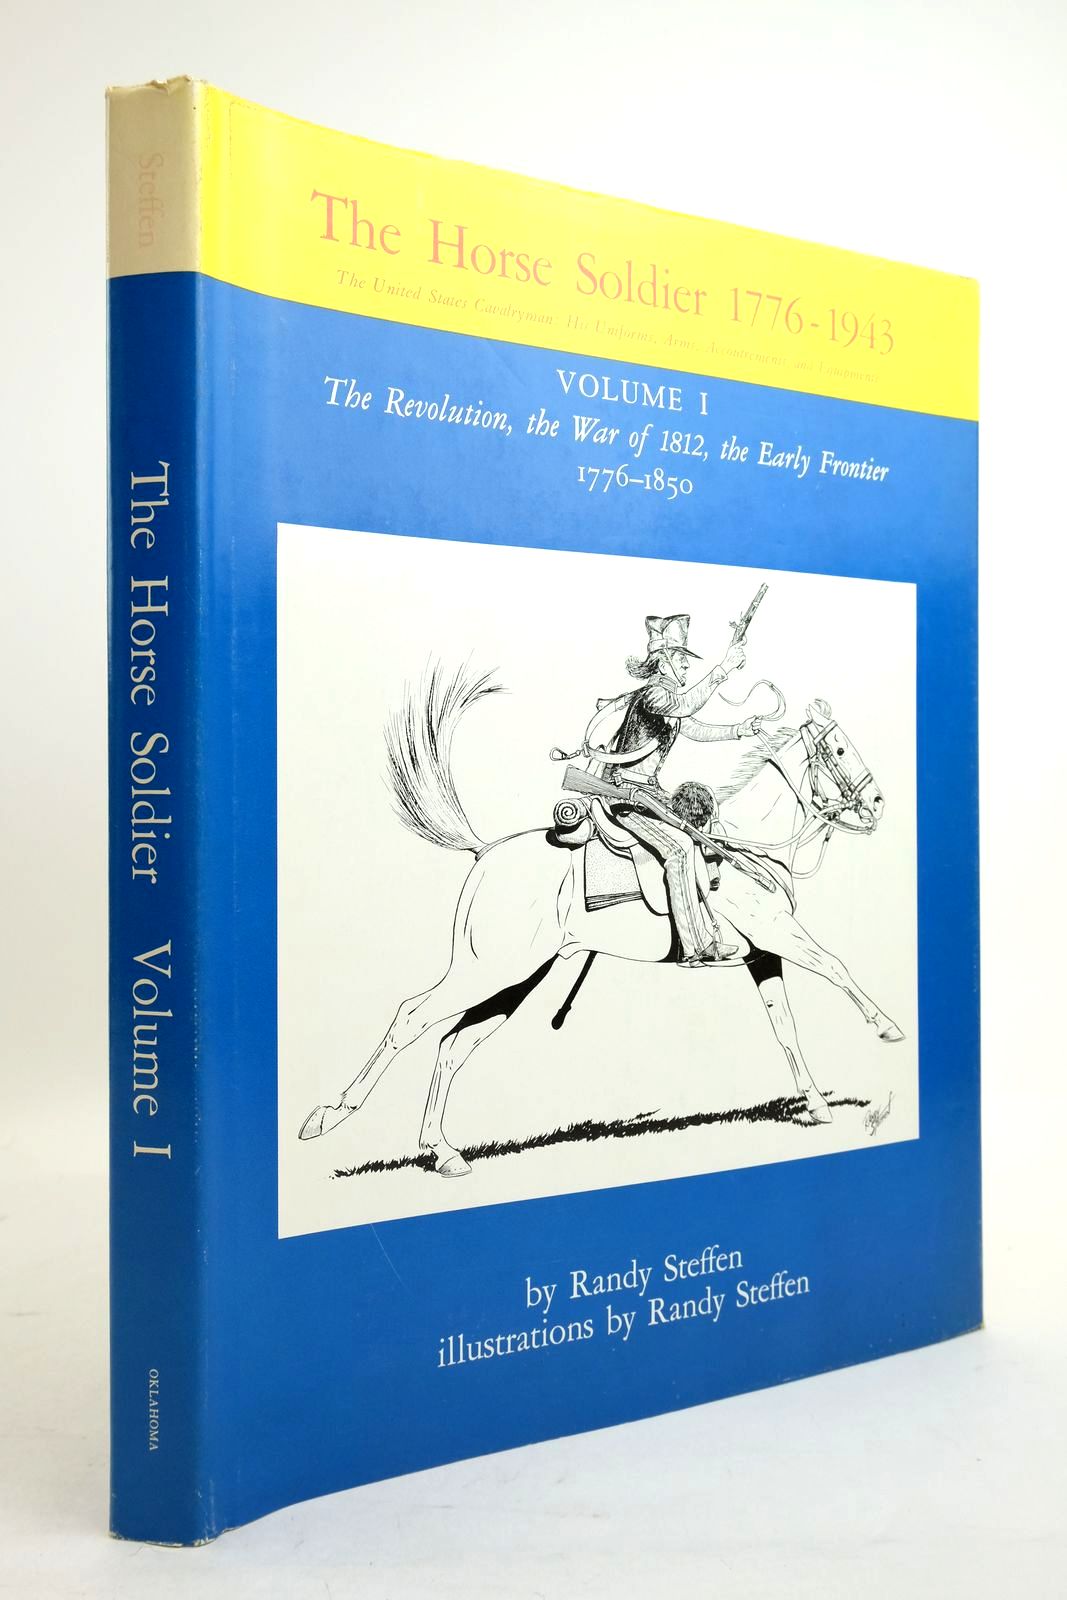 Photo of THE HORSE SOLDIER 1776-1943: VOLUME I: THE REVOLUTION, THE WAR OF 1812, THE EARLY FRONTIER 1776-1850 written by Steffen, Randy illustrated by Steffen, Randy published by University of Oklahoma Press (STOCK CODE: 2134513)  for sale by Stella & Rose's Books